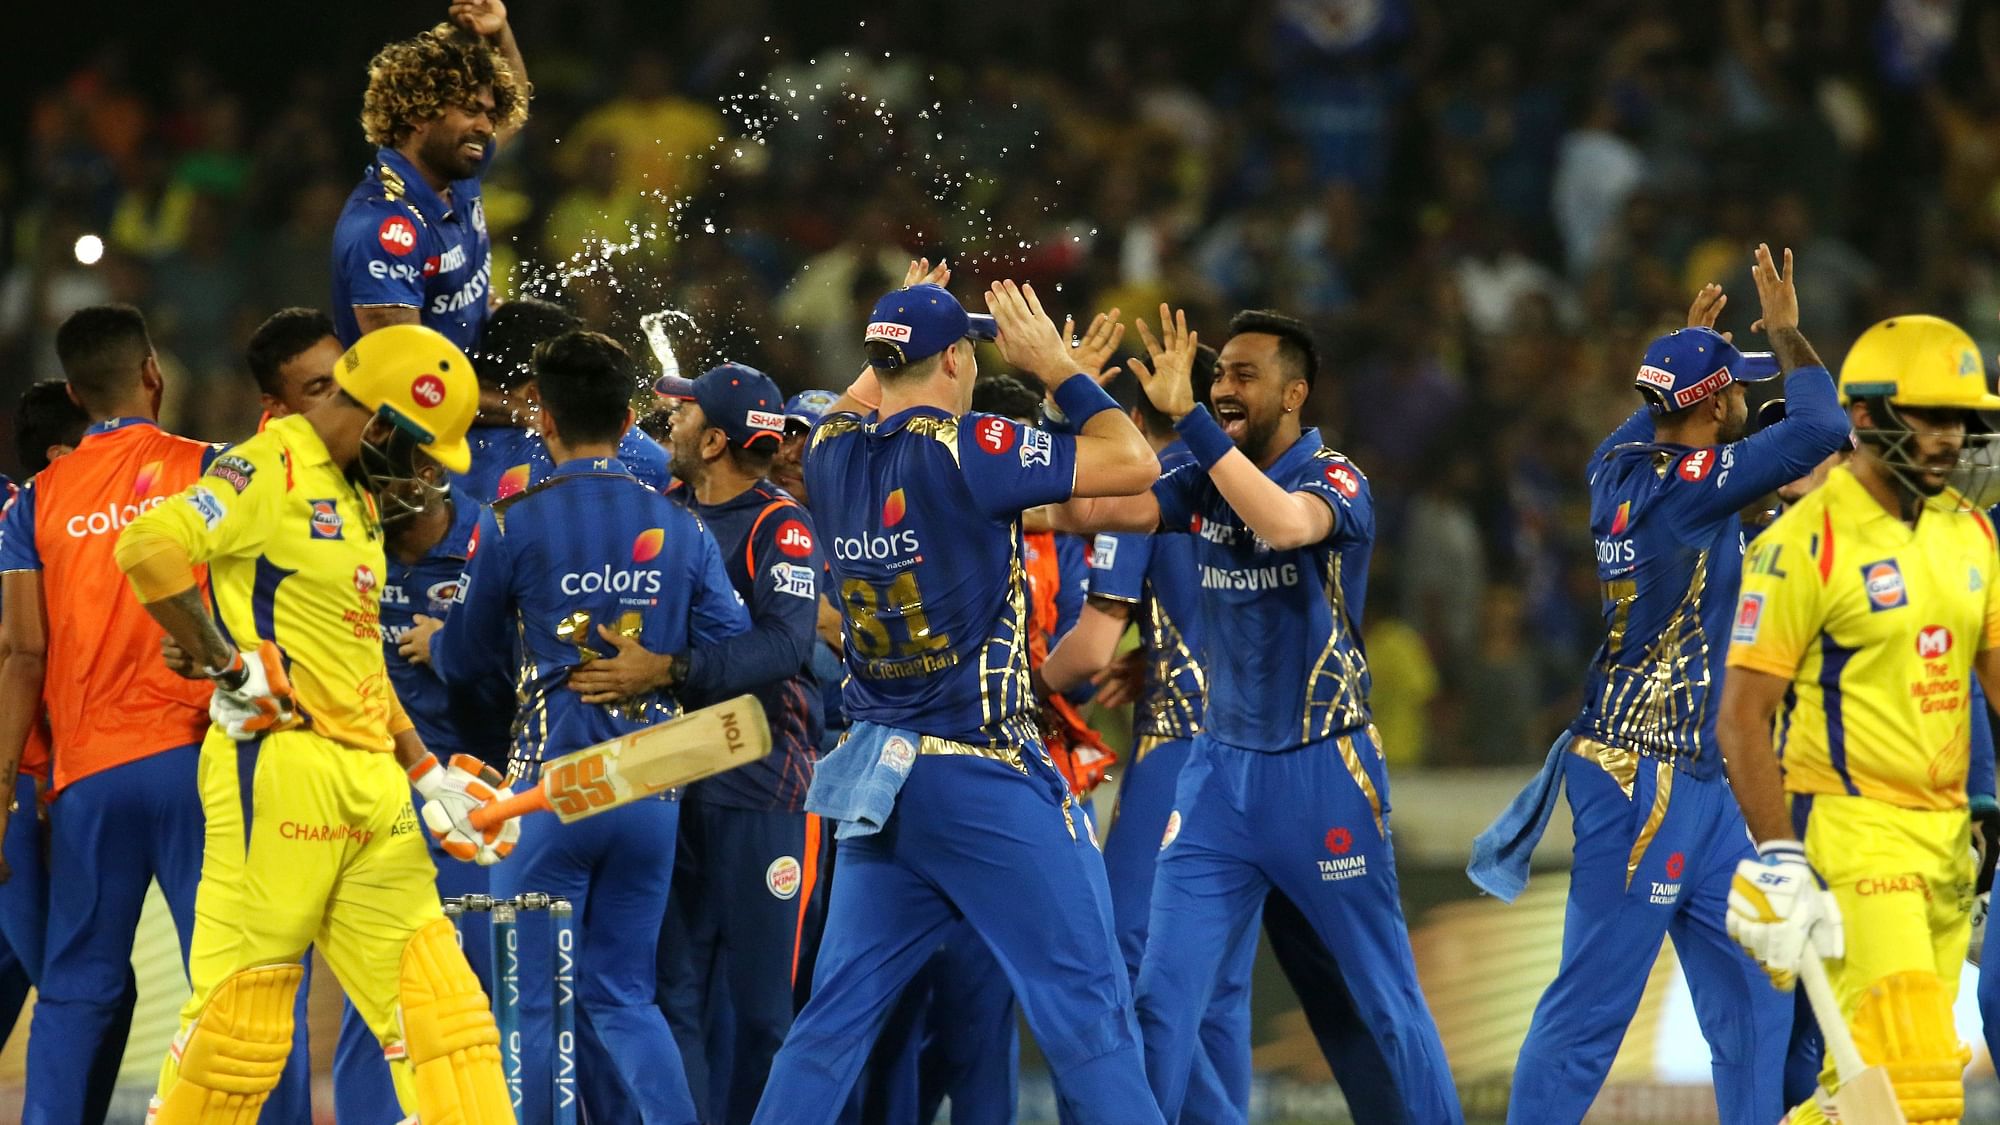 Mumbai Indians Beat Chennai Super Kings by 1 Run in the IPL 2019 Final in Hyderabad on Sunday.